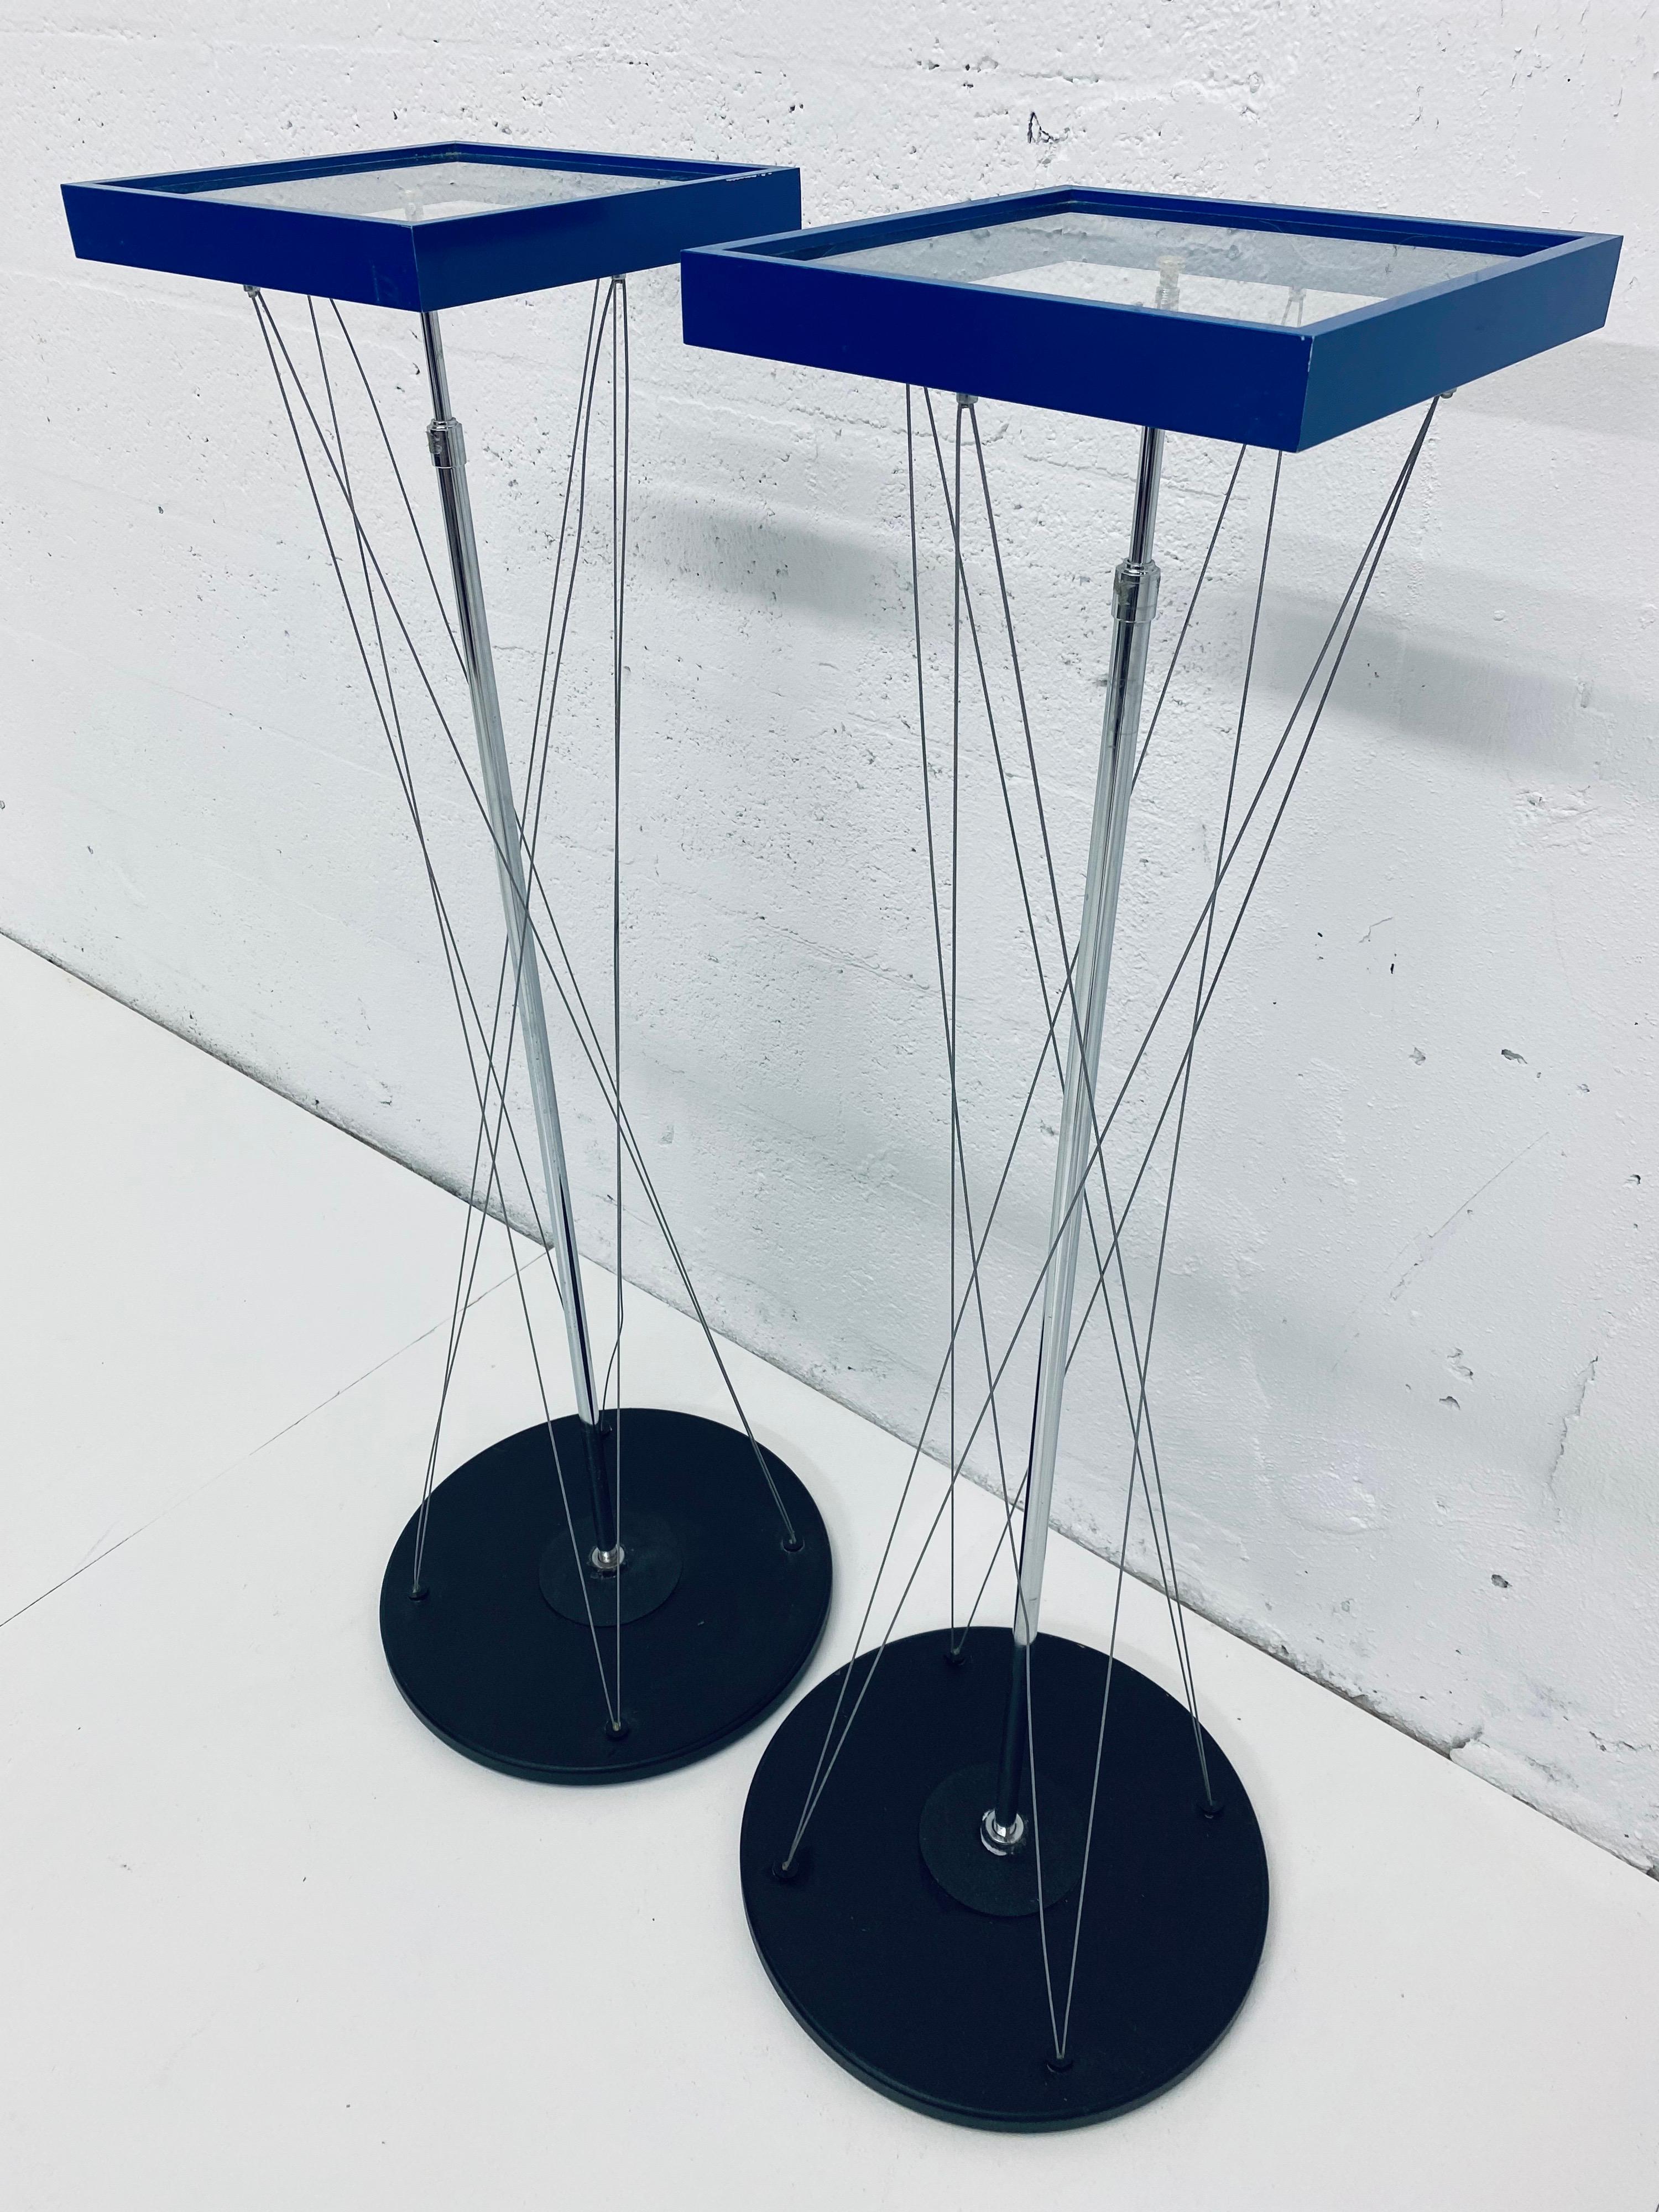 Two contemporary pedestal tables with electric blue steel frame top with glass insert on a steel shaft and held in place by tension wires connected to a black base.

Top overall dimensions:
W 10.25